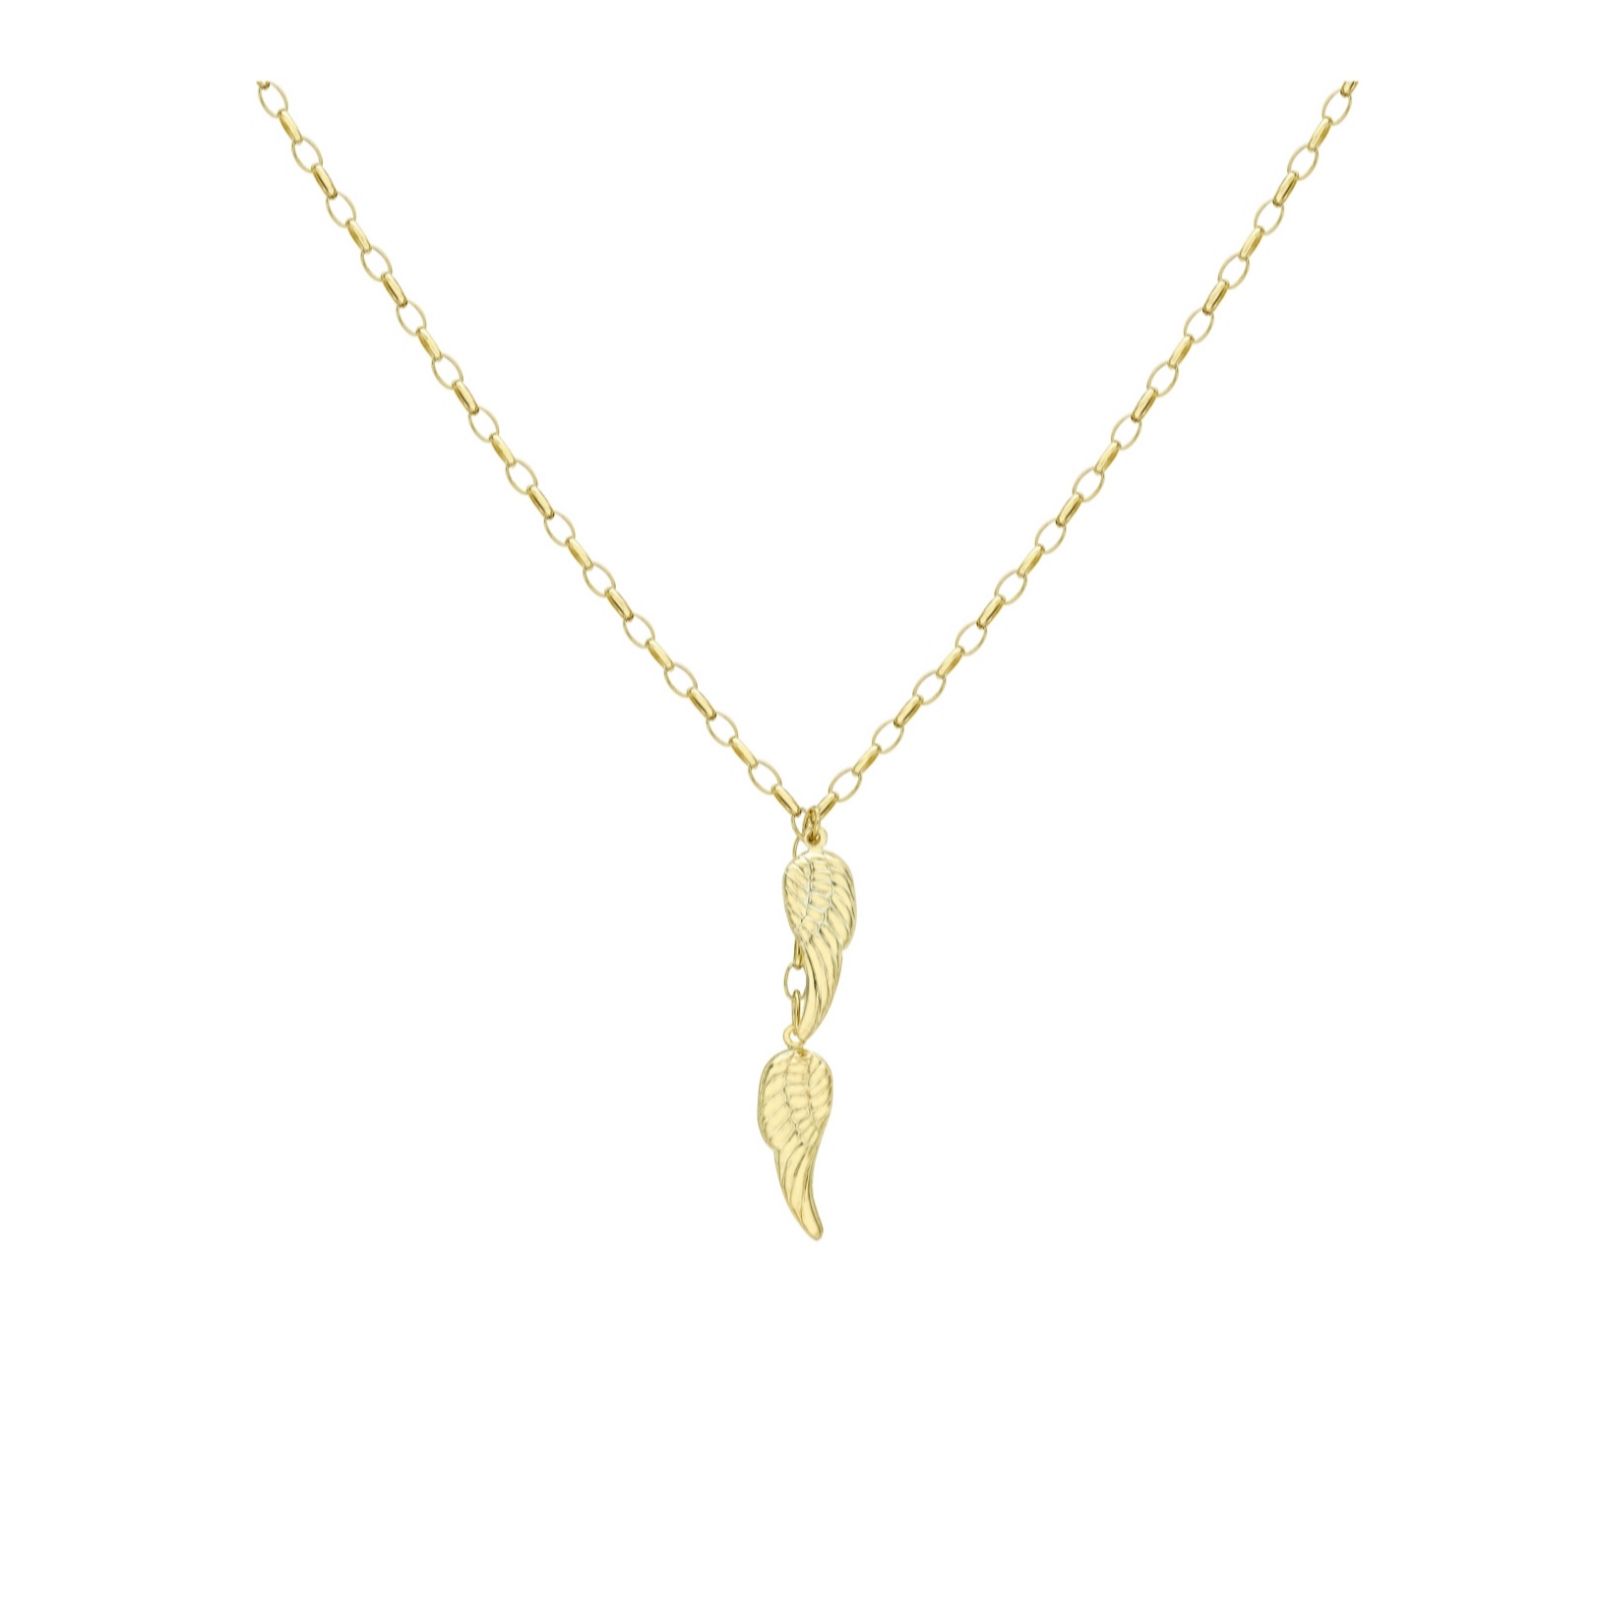 GOLD 9ct Yellow Angel Wings Charm Drop Necklace 46cm/18' 3.23g - QVC UK